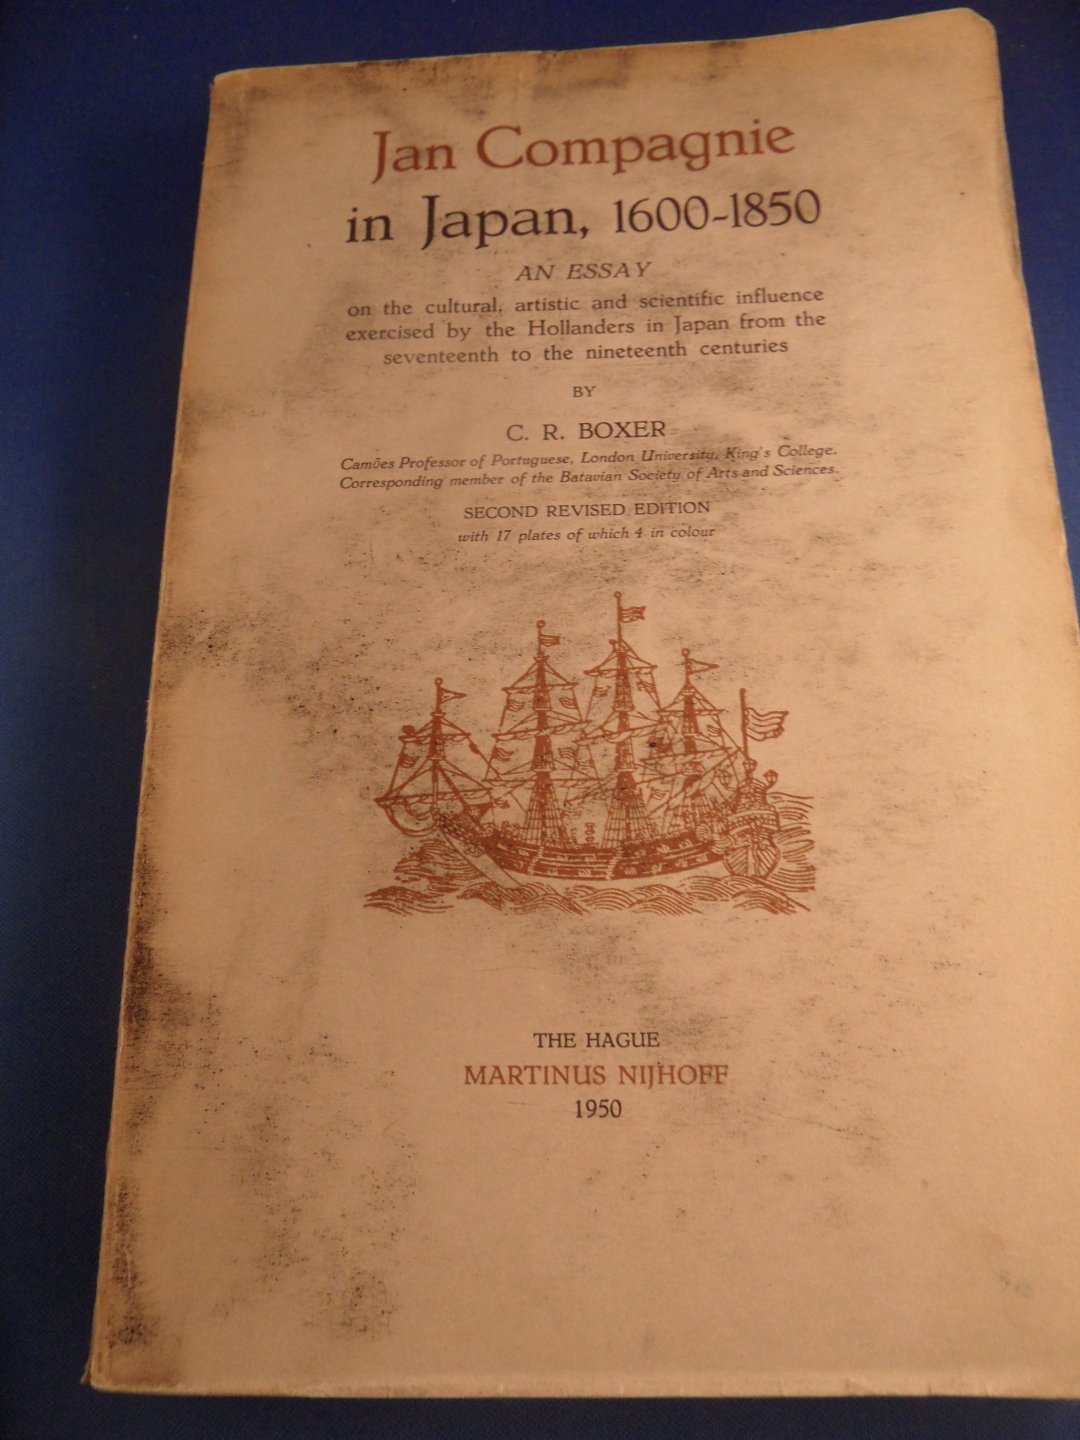 Boxer, C.R - Jan Compagnie in Japan, 1600-1850. An Essay on the cultural, artistic and scientific influence exercised by the Hollanders in Japan from the seventeenth to the nineteenth centuries.